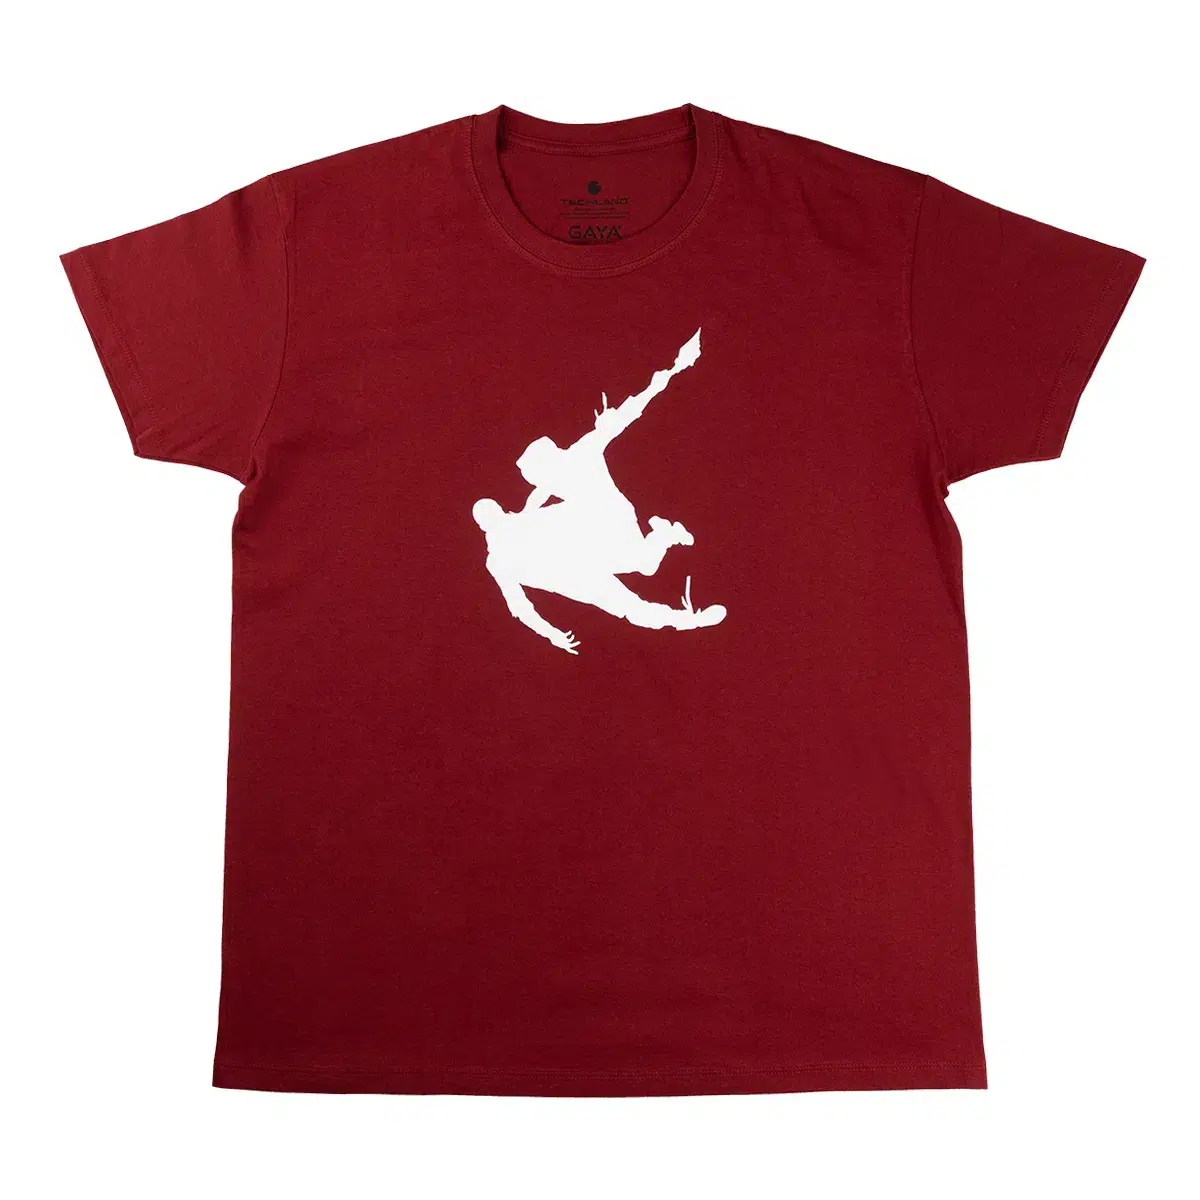 Dying Light 2 T-Shirt "Caldwell" Red L